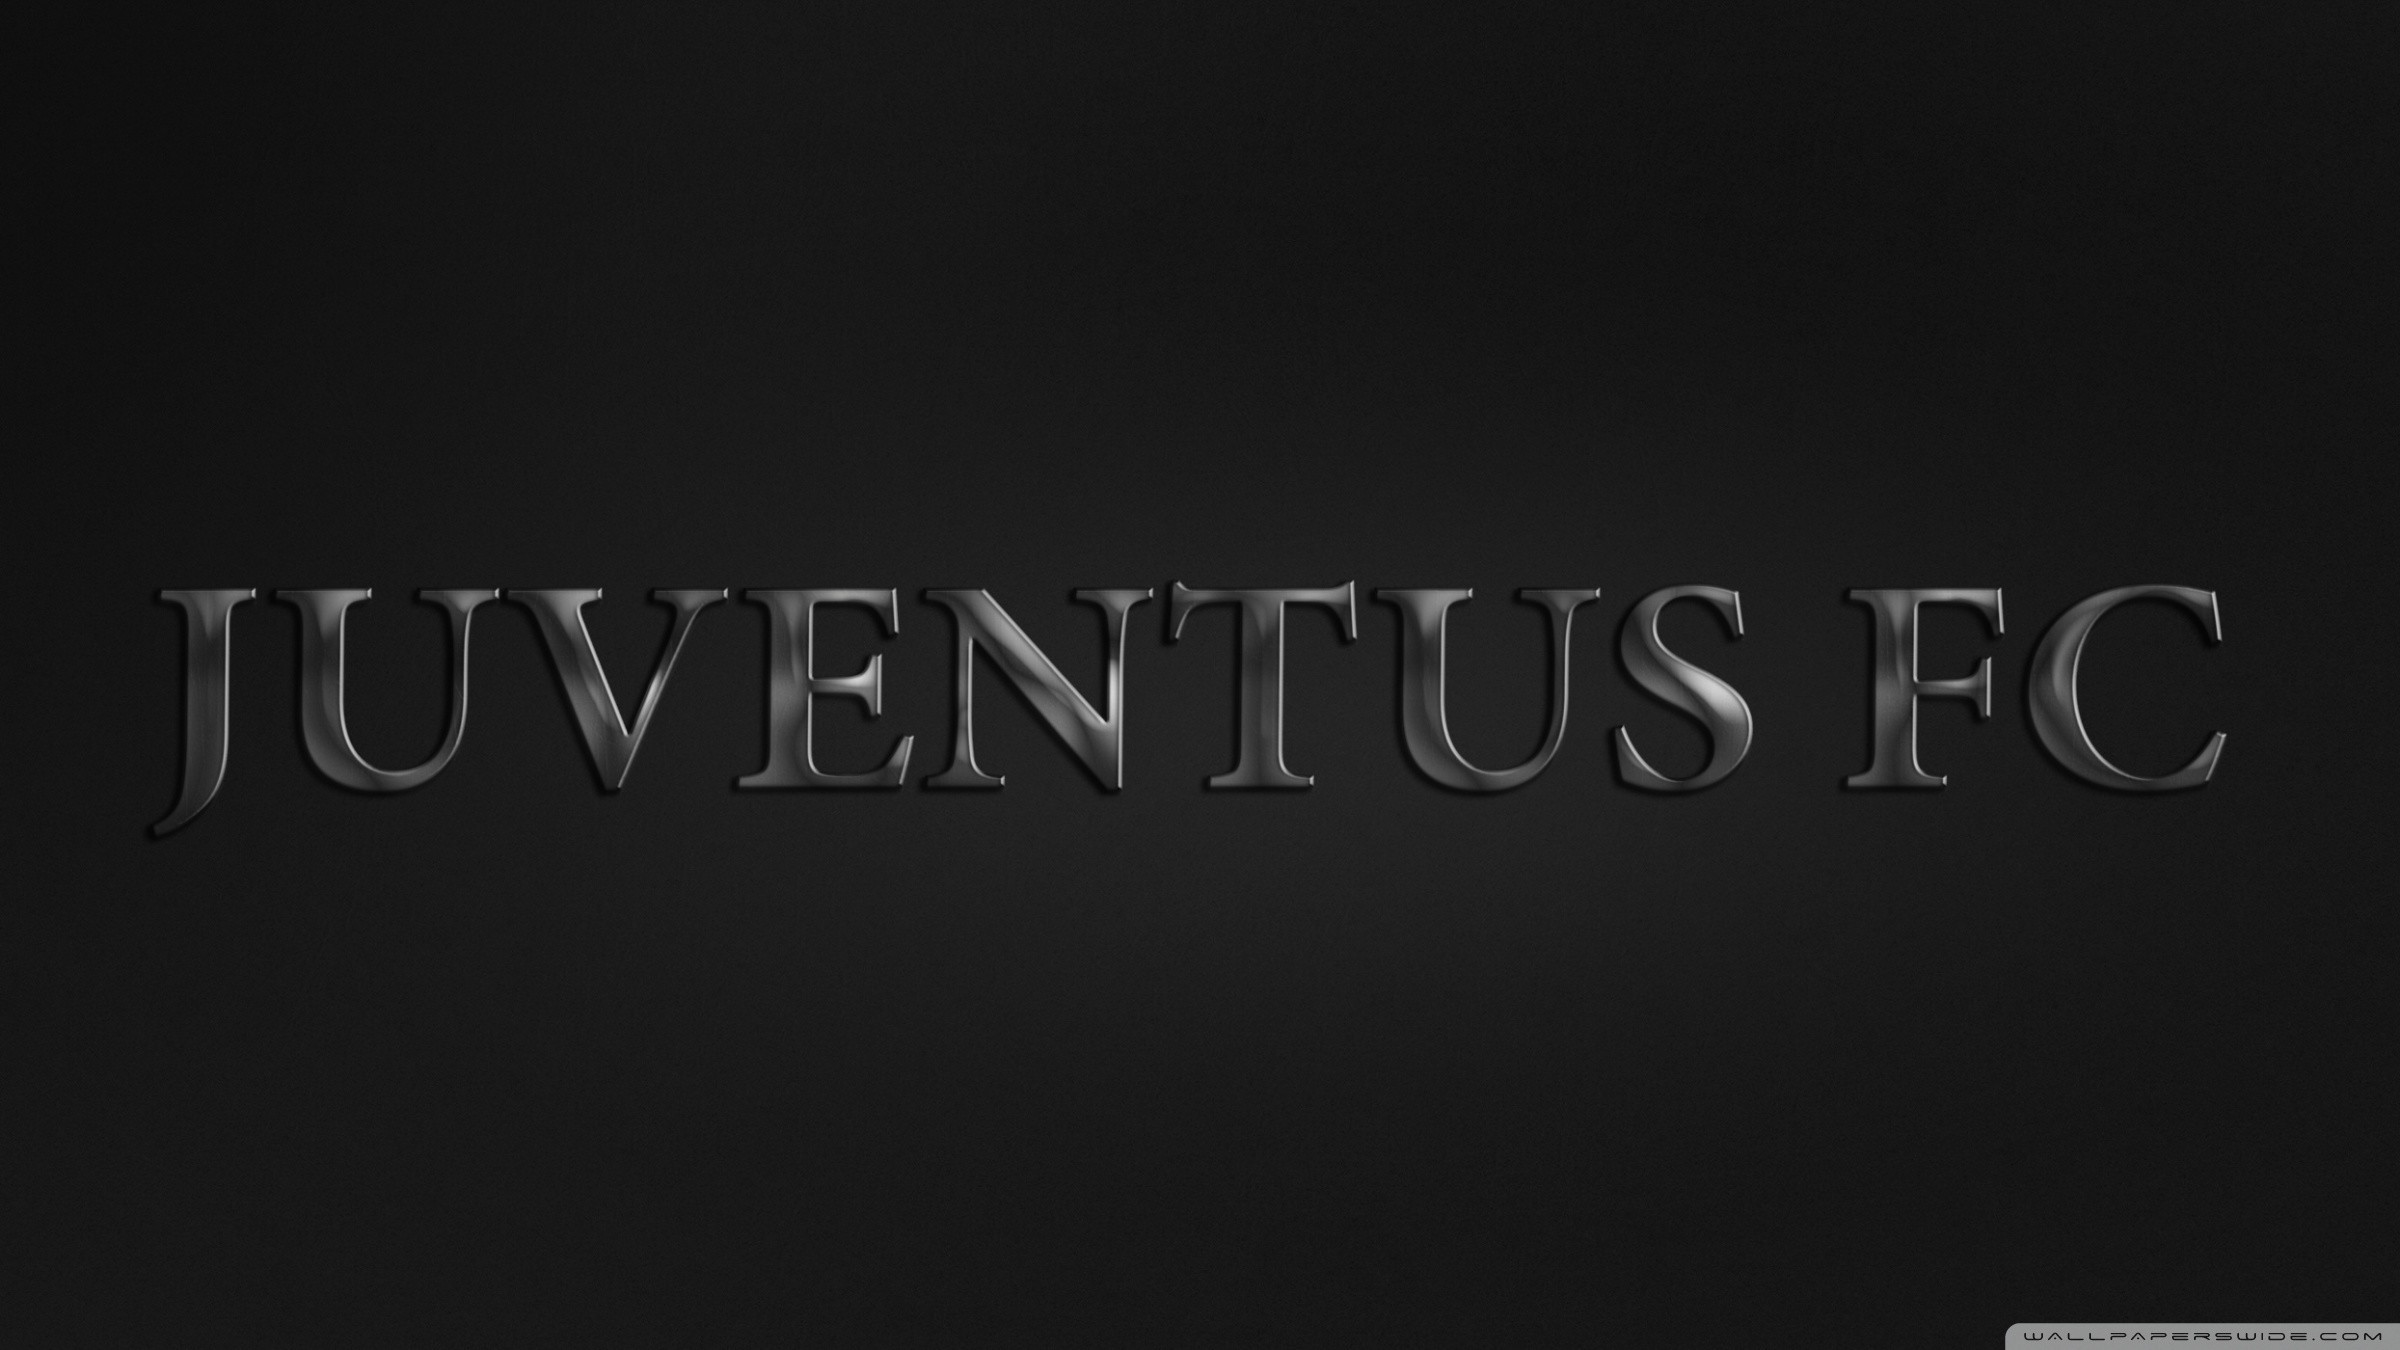 2400x1350 1920x1080 Wallpapers HD Juventus with resolution 1920x1080 pixel. You can  make this wallpaper for your Mac